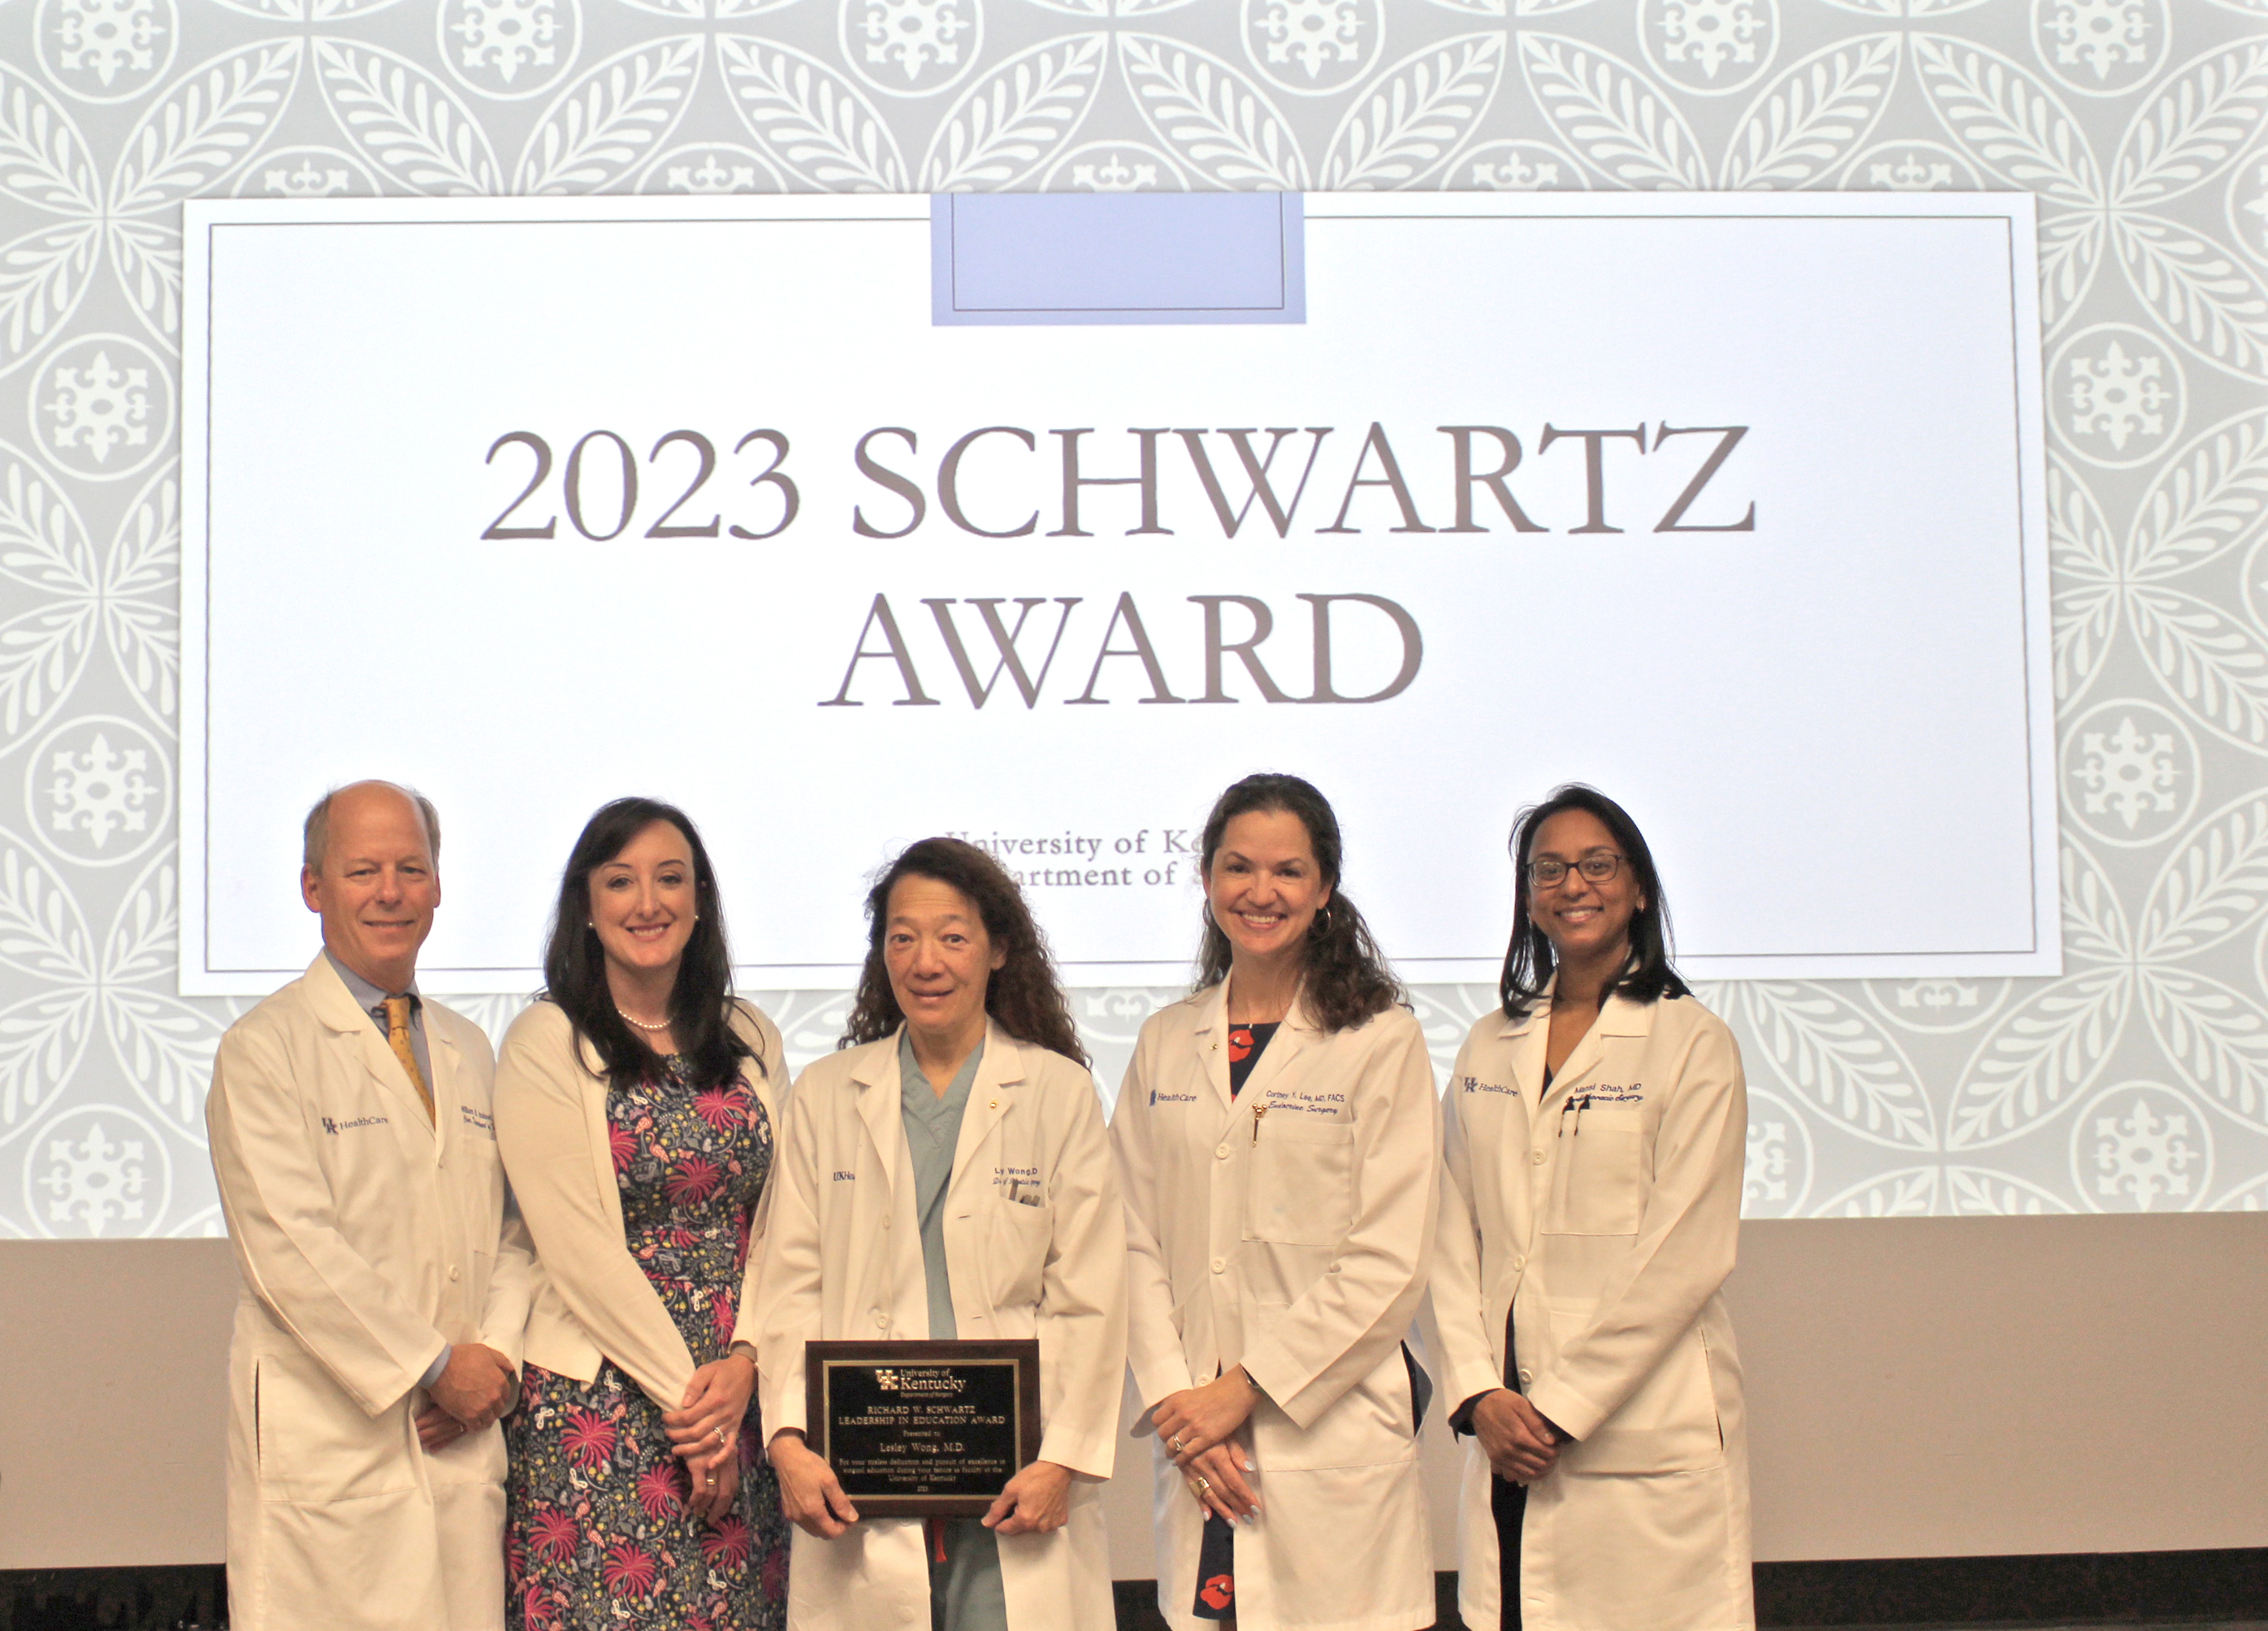 Lesley Wong, MD: The 2023 recipient of the Schwartz Award for lifetime achievement in surgery educaiton